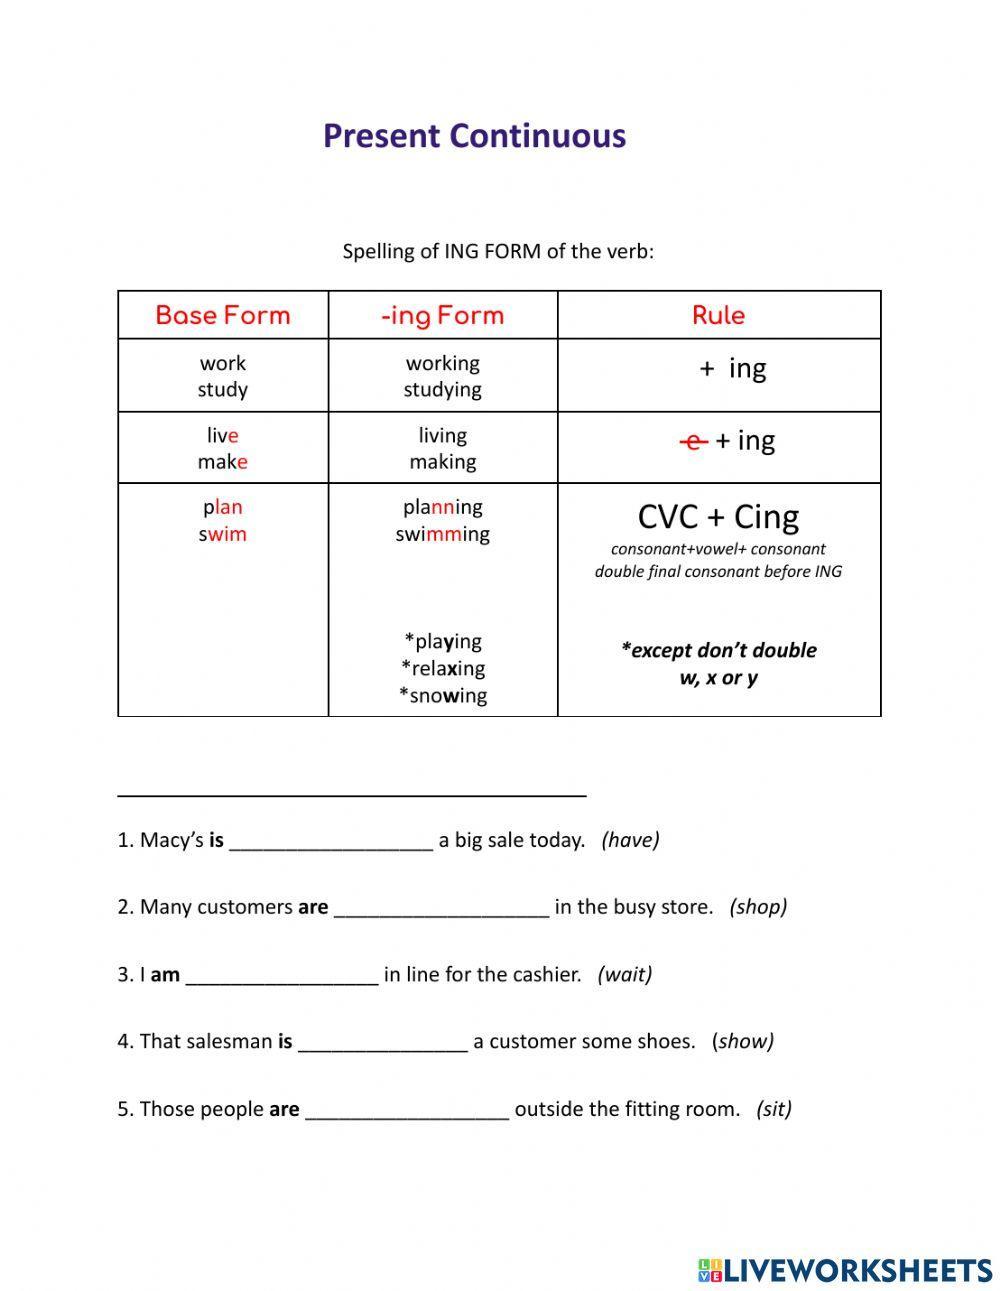 ING form of the verb